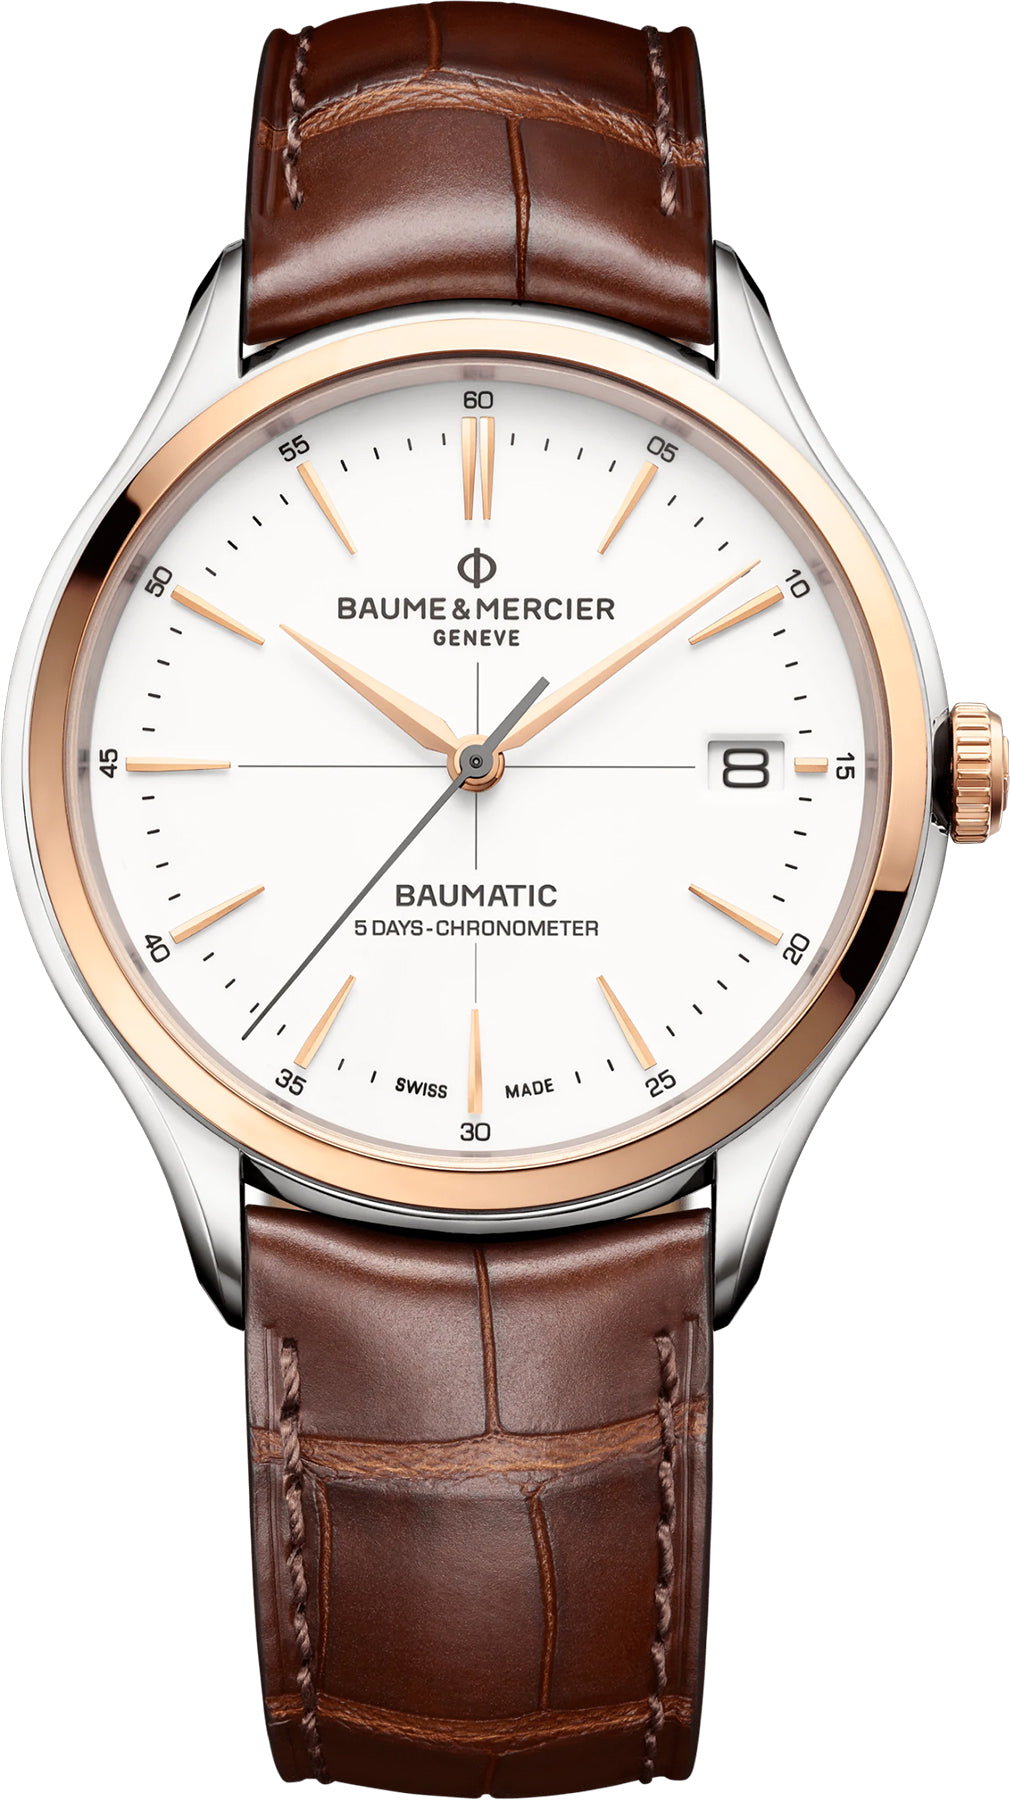 Baume Mercier Clifton Baumatic 10591 - New Addition to the Collection |  WatchUSeek Watch Forums